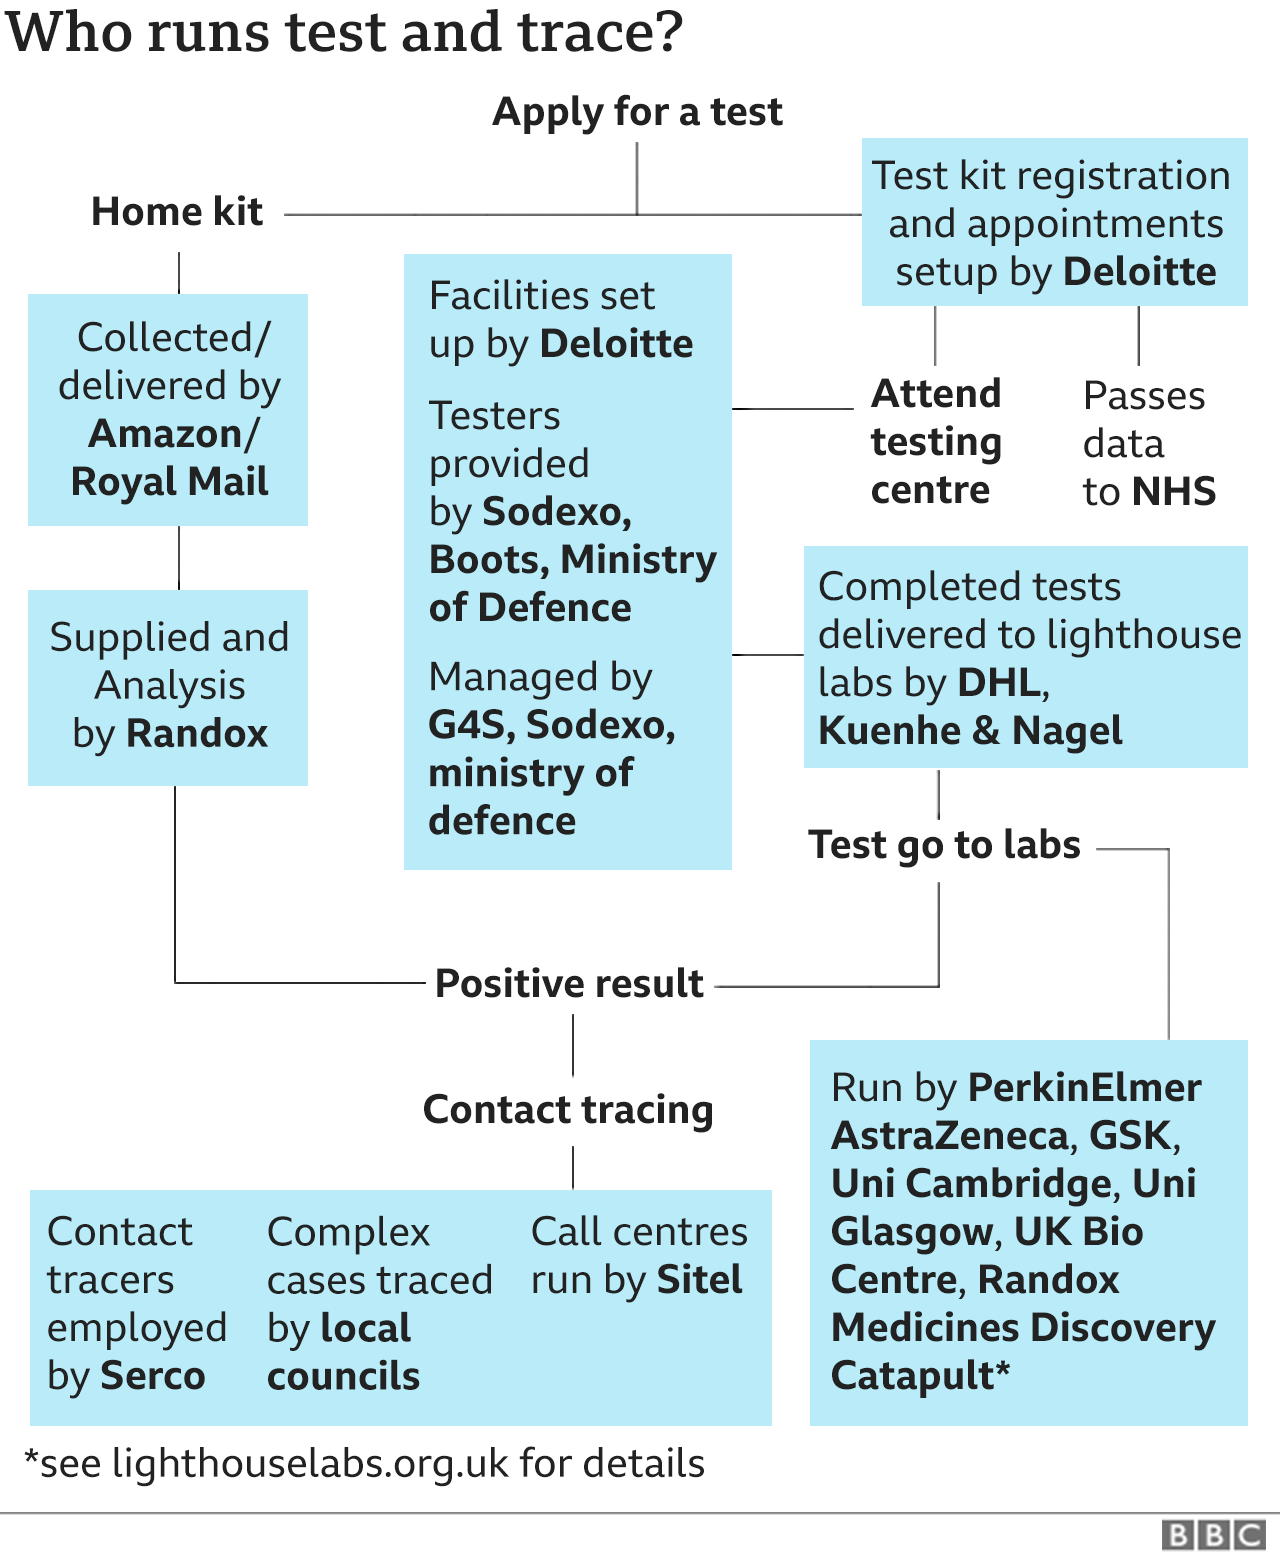 The companies involved in Test and Trace